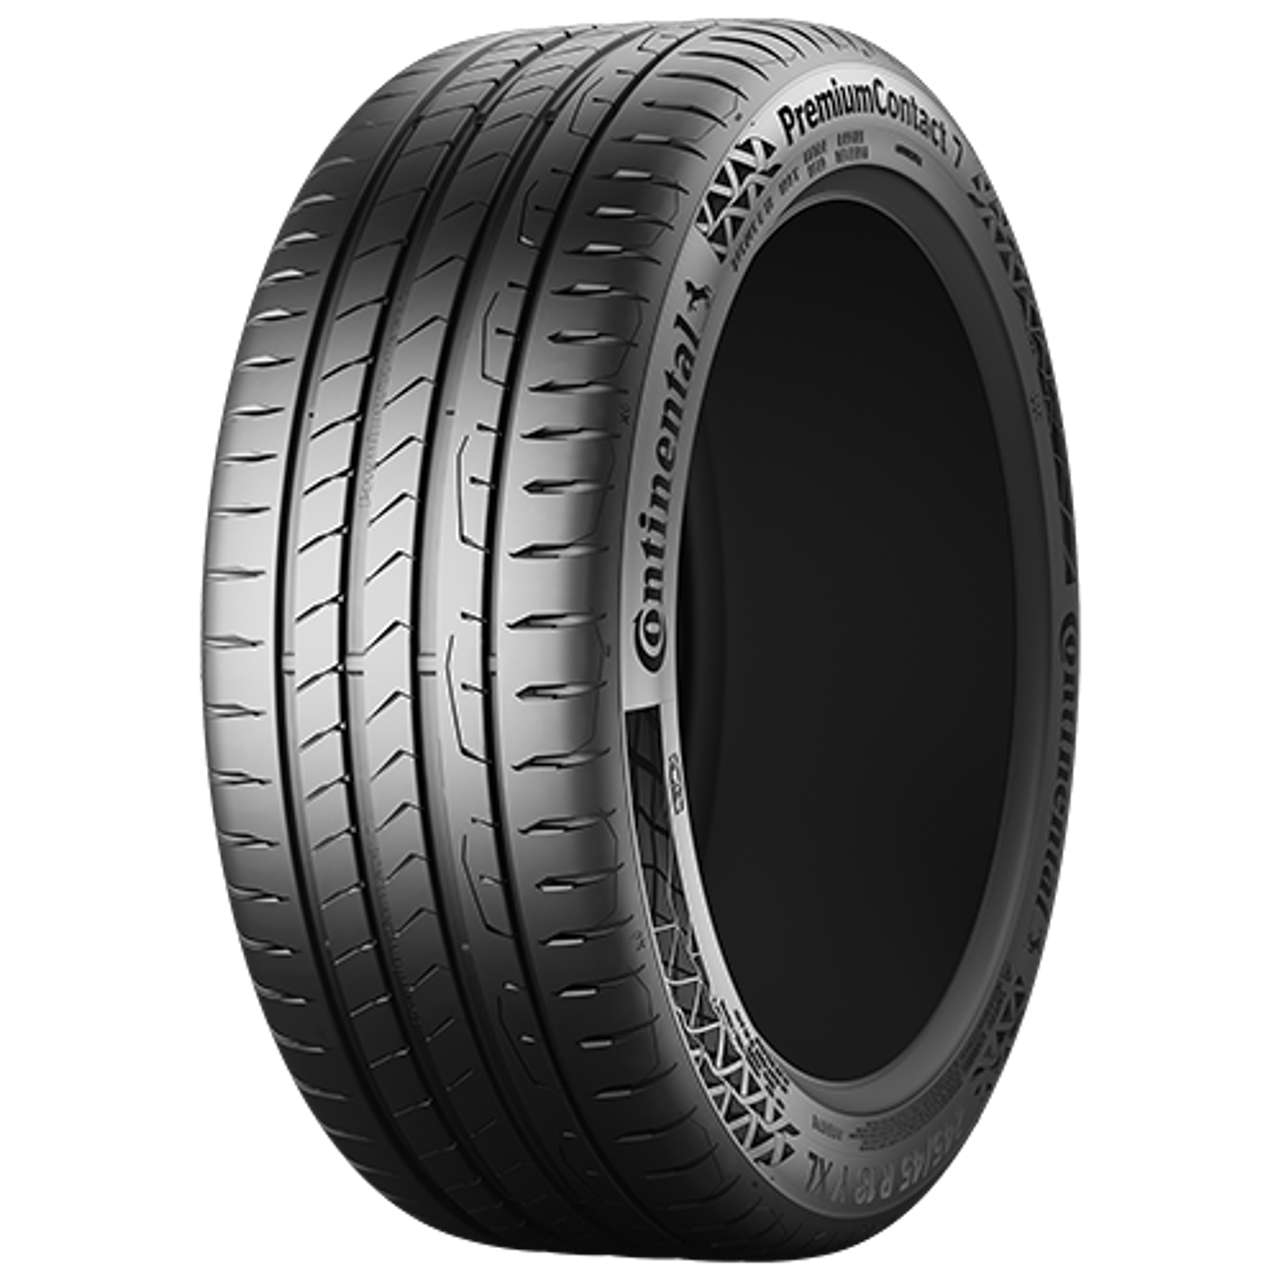 CONTINENTAL PREMIUMCONTACT 7 (EVc) 225/45R18 91W FR BSW